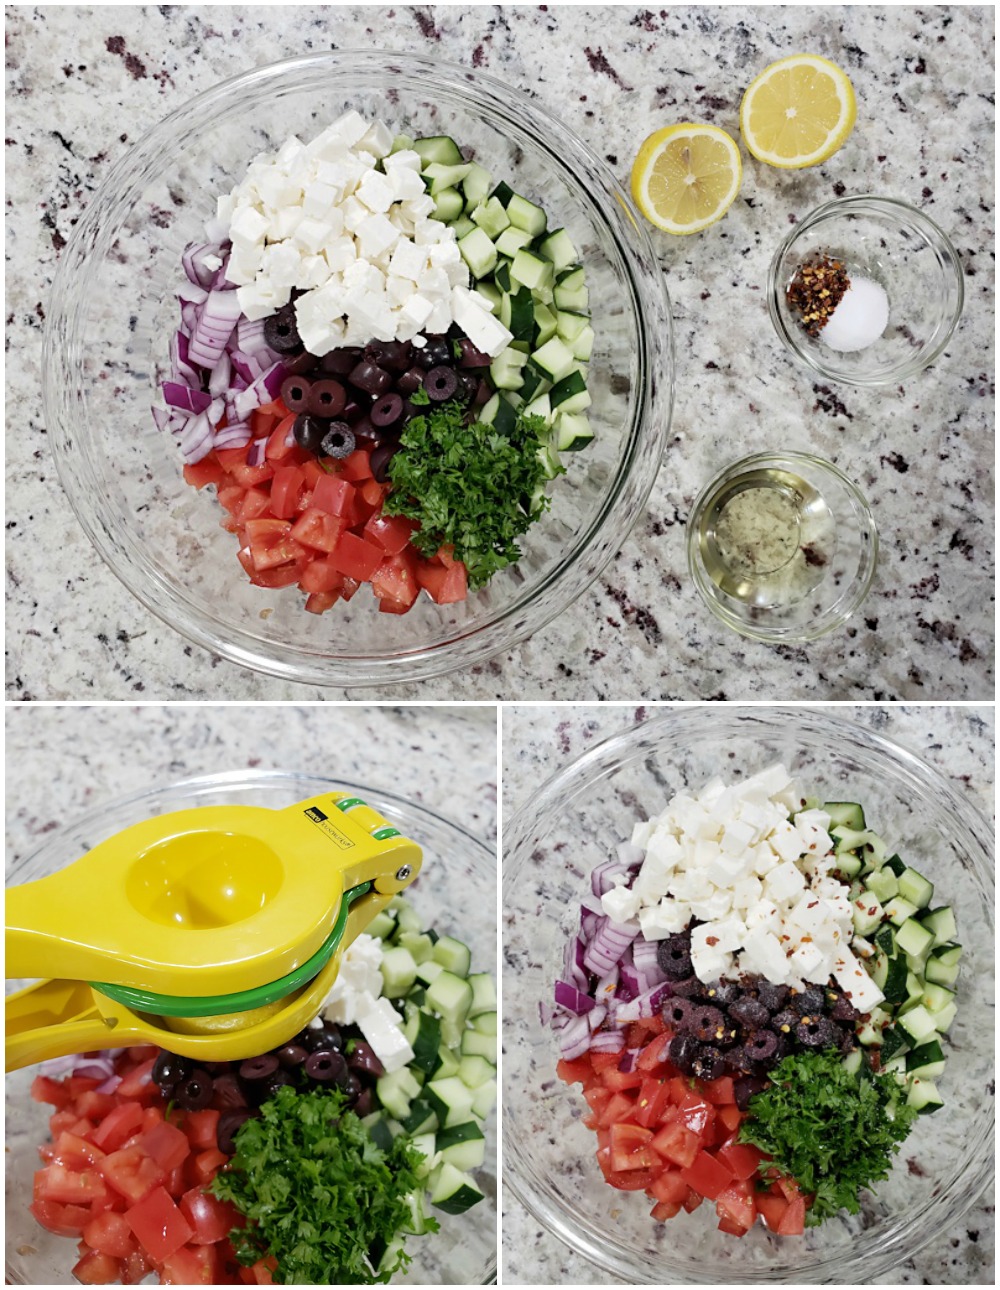 Adding the dressing to your salad ingredients.